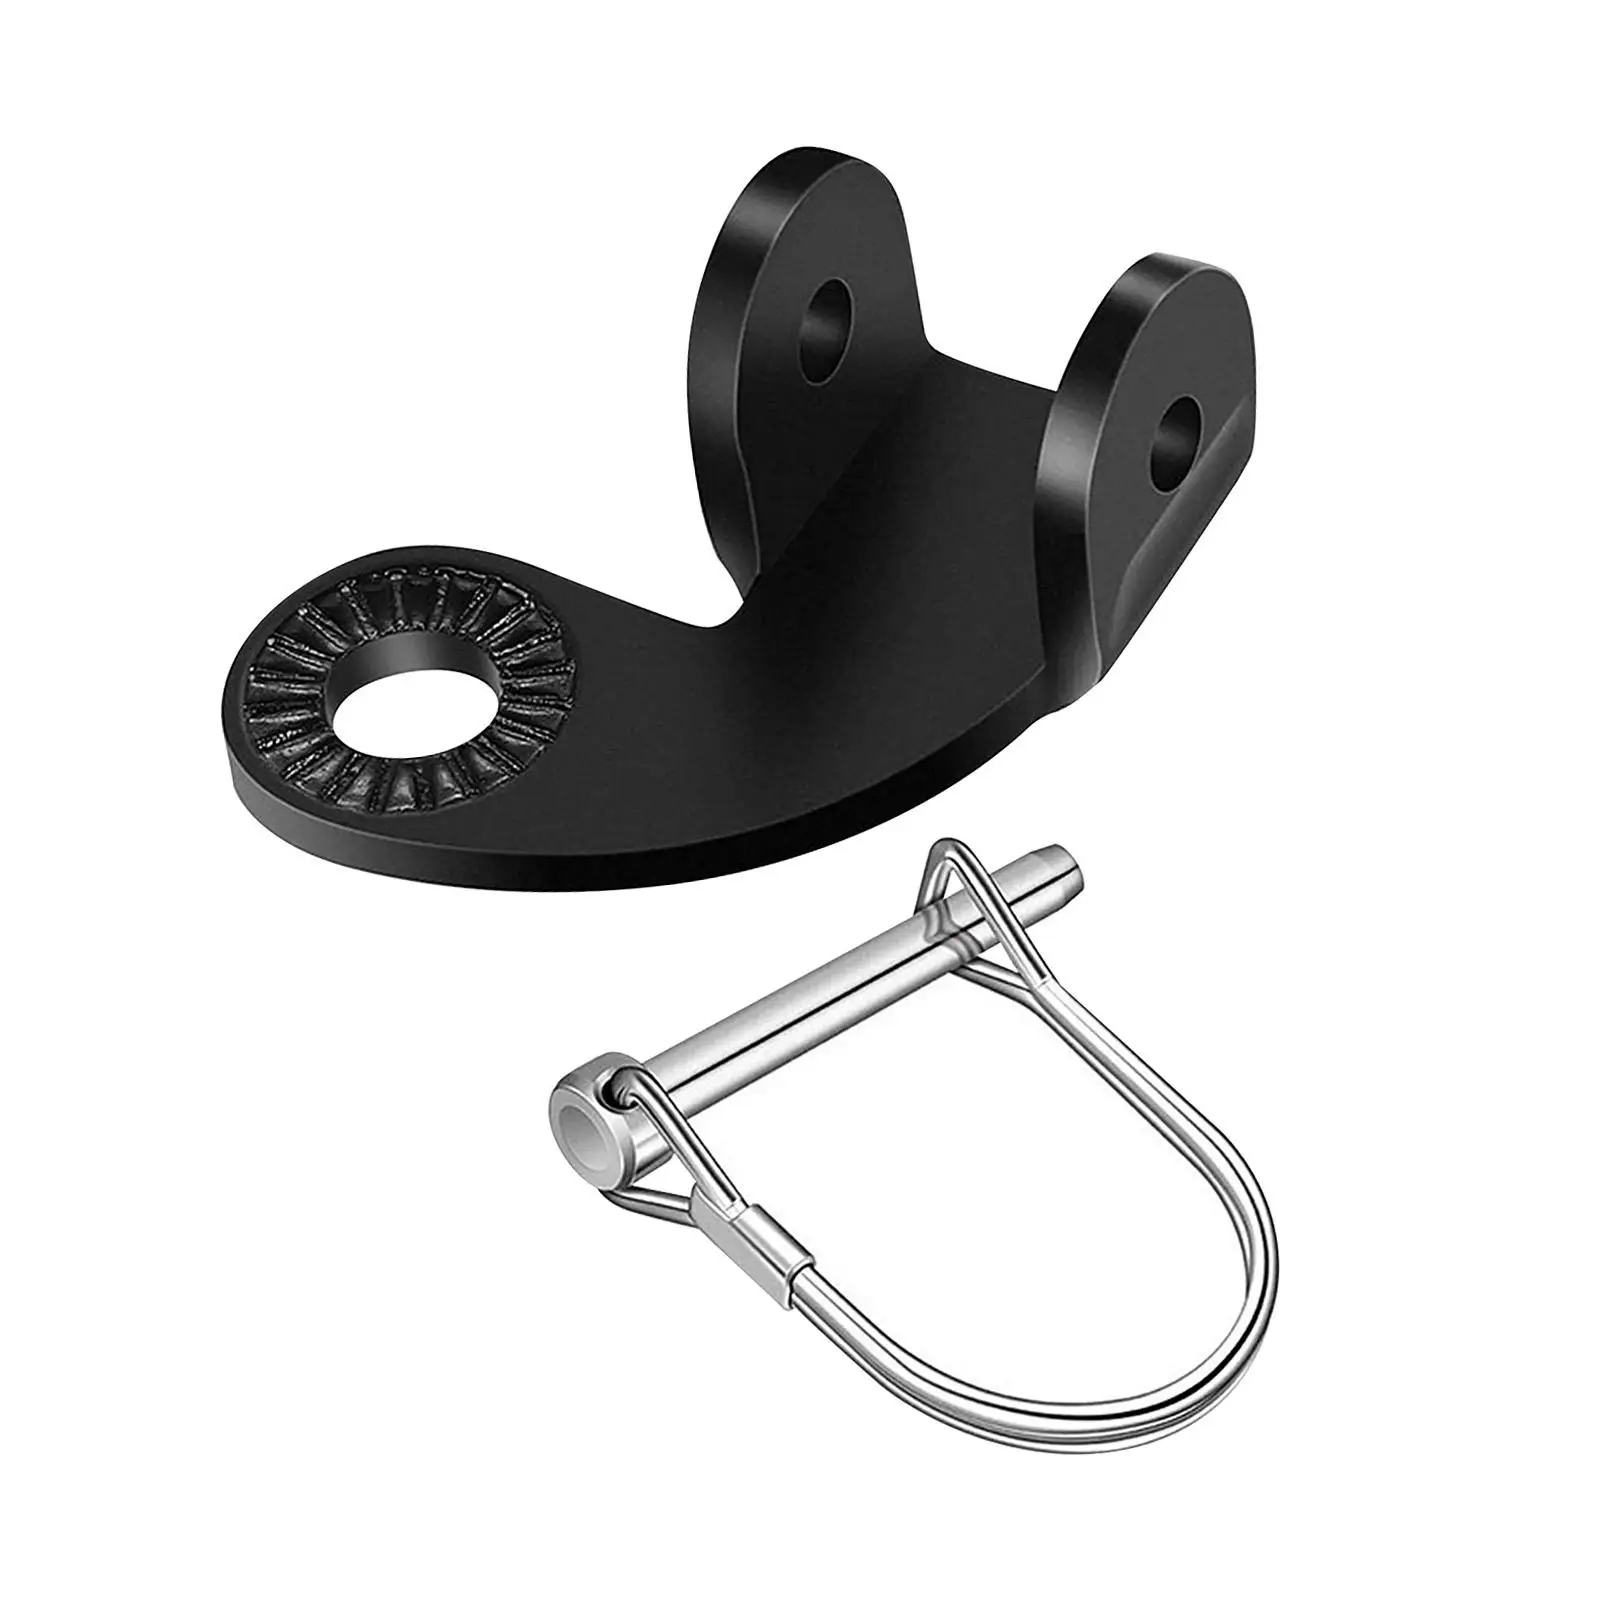 Bike Trailer Hitch Steel Adapter for Strollers Bicycle Trailer Coupler